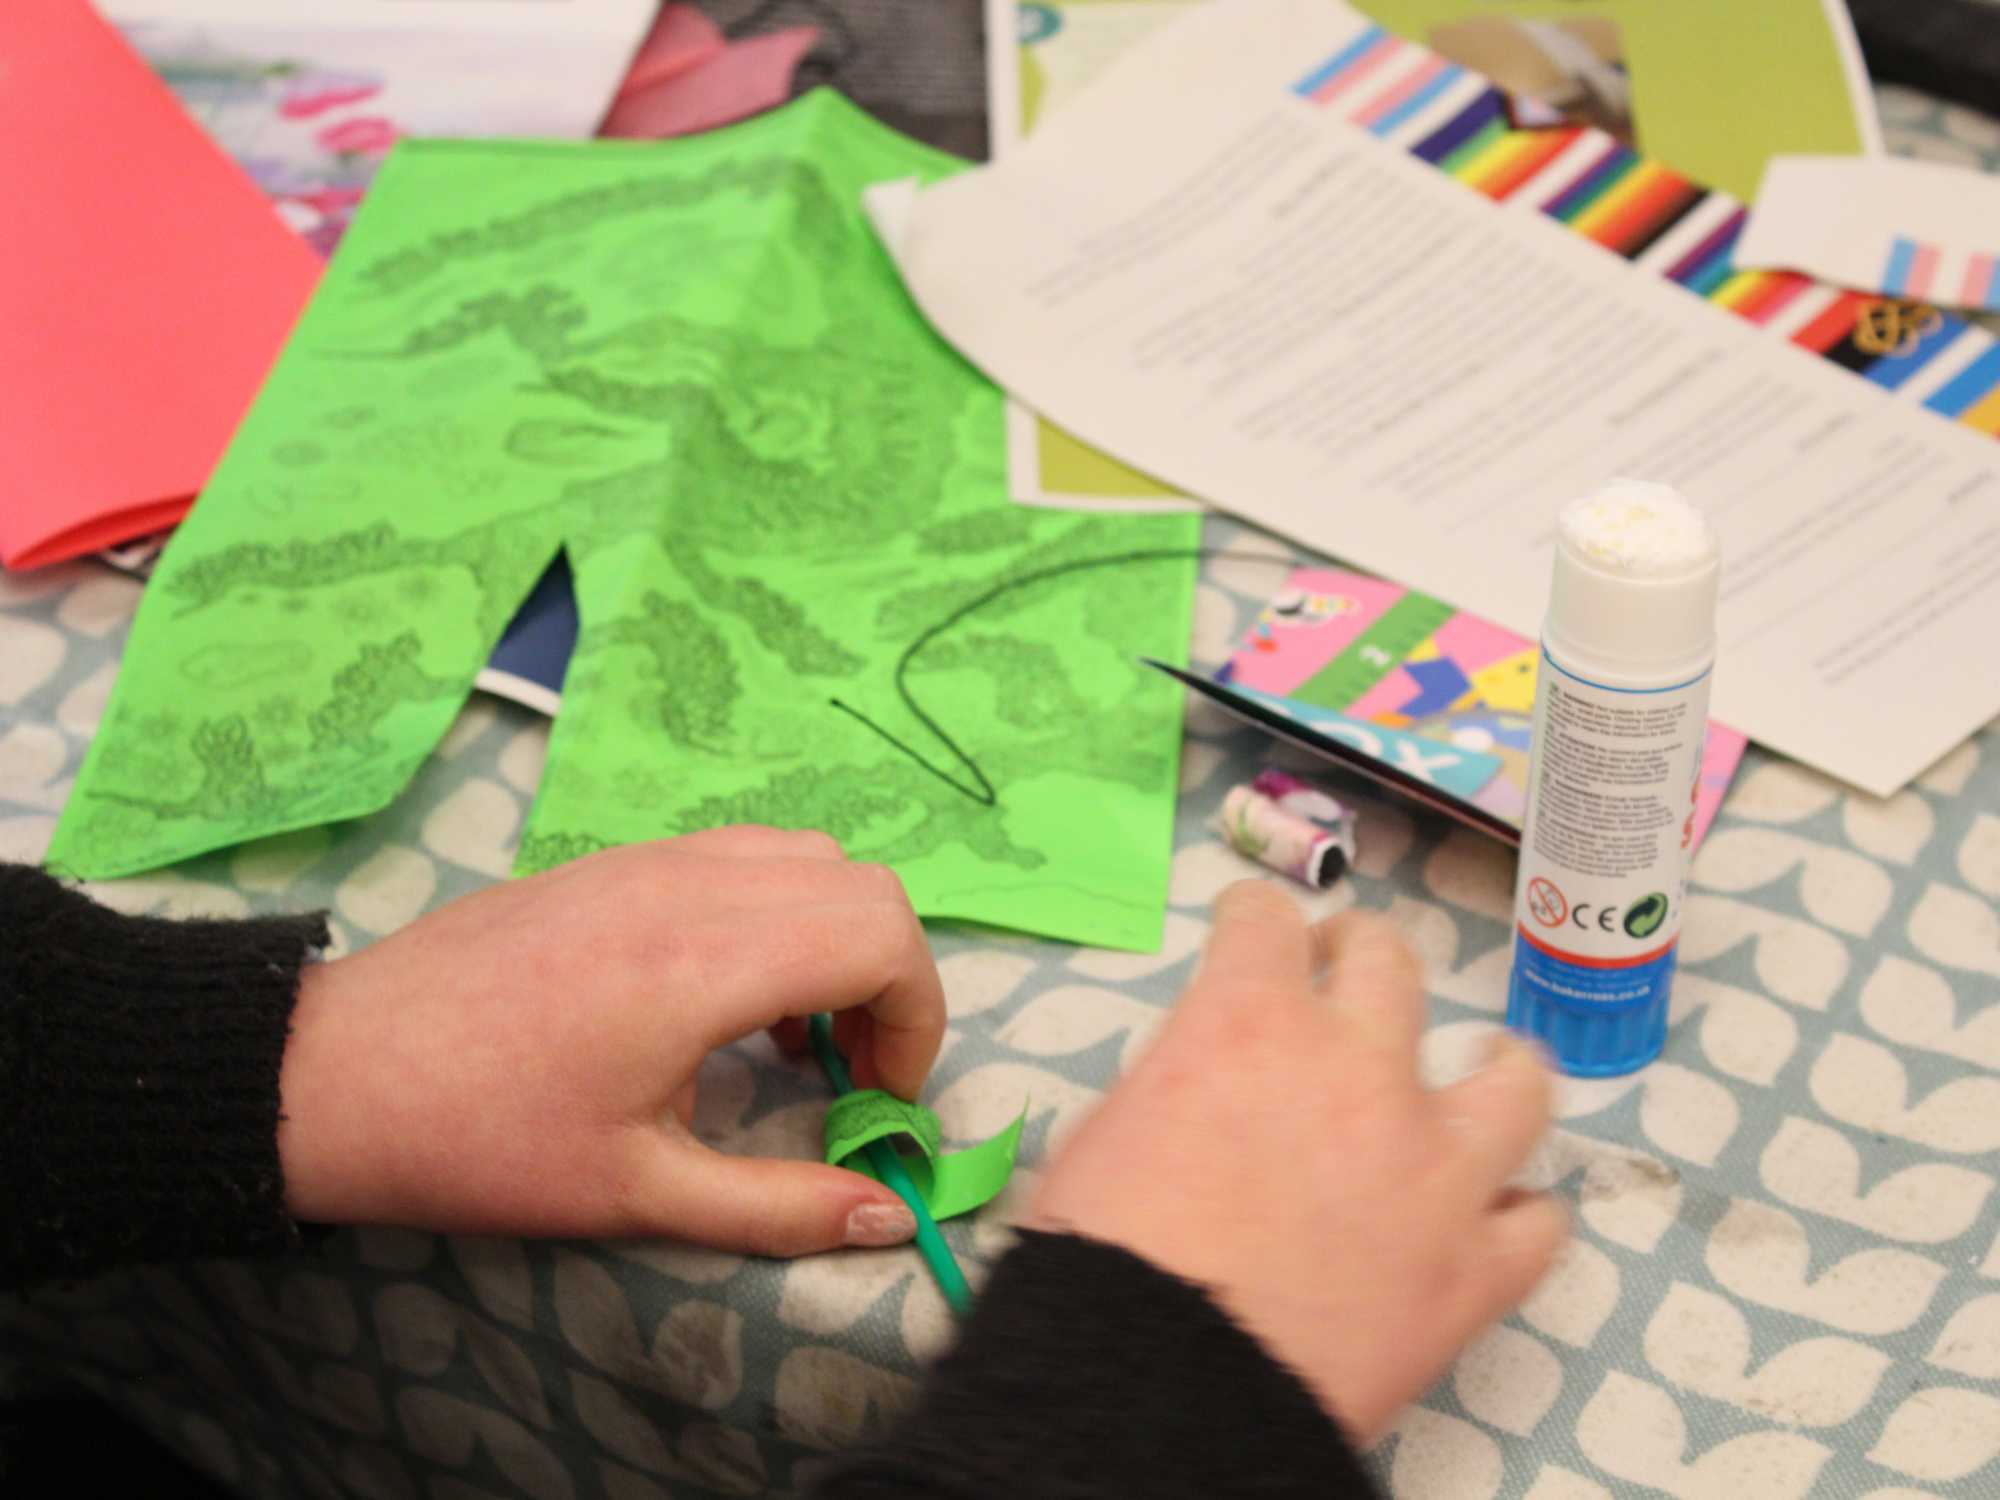 A table full of craft materials, including paper and glue. A child's hands interact with the materials.